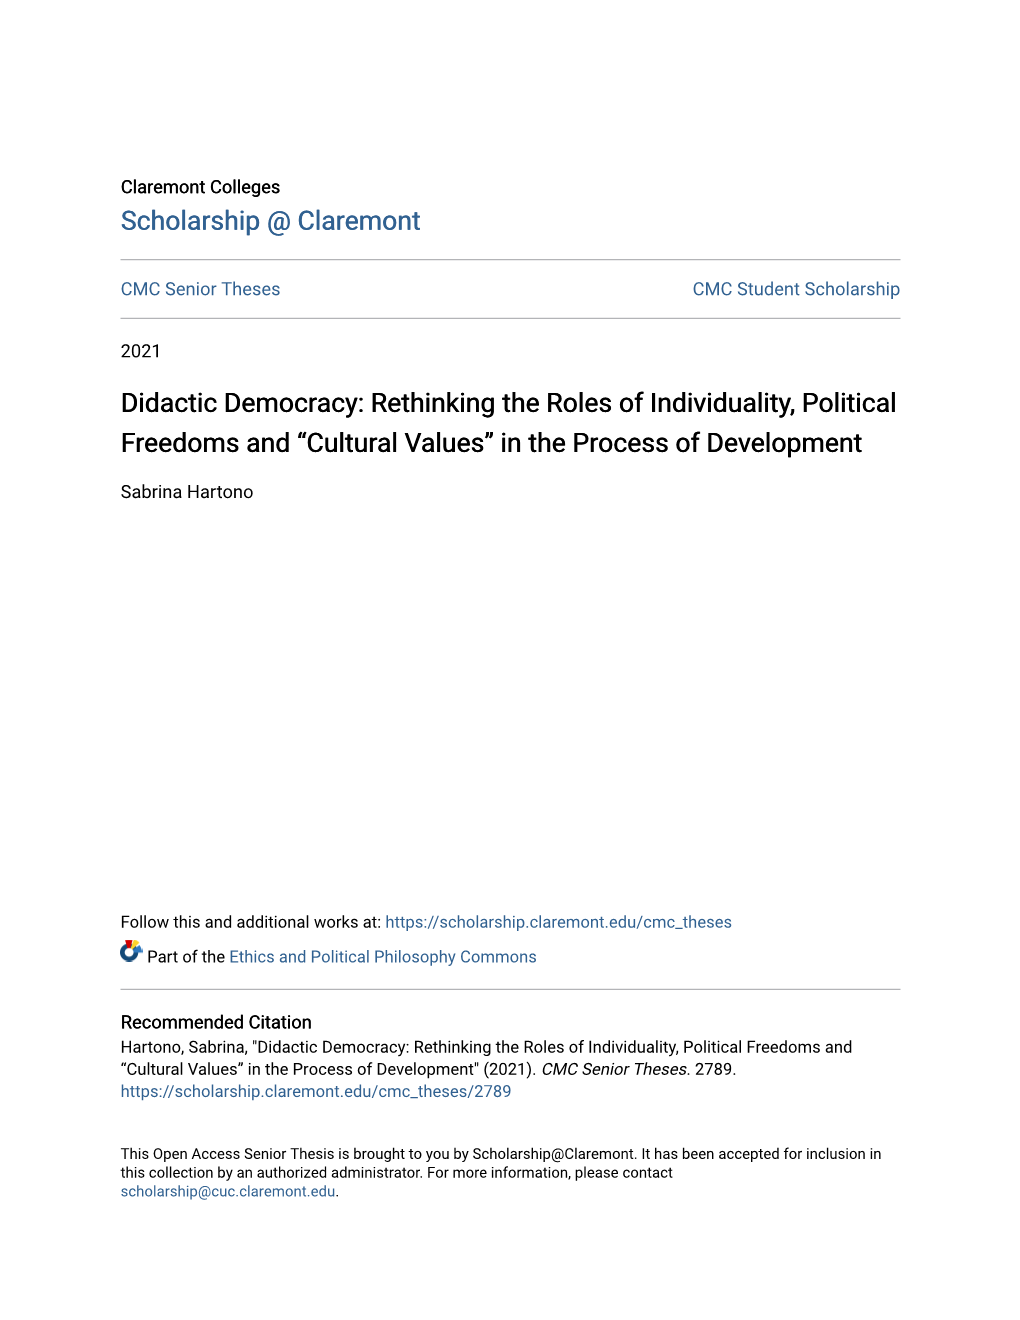 Didactic Democracy: Rethinking the Roles of Individuality, Political Freedoms and “Cultural Values” in the Process of Development